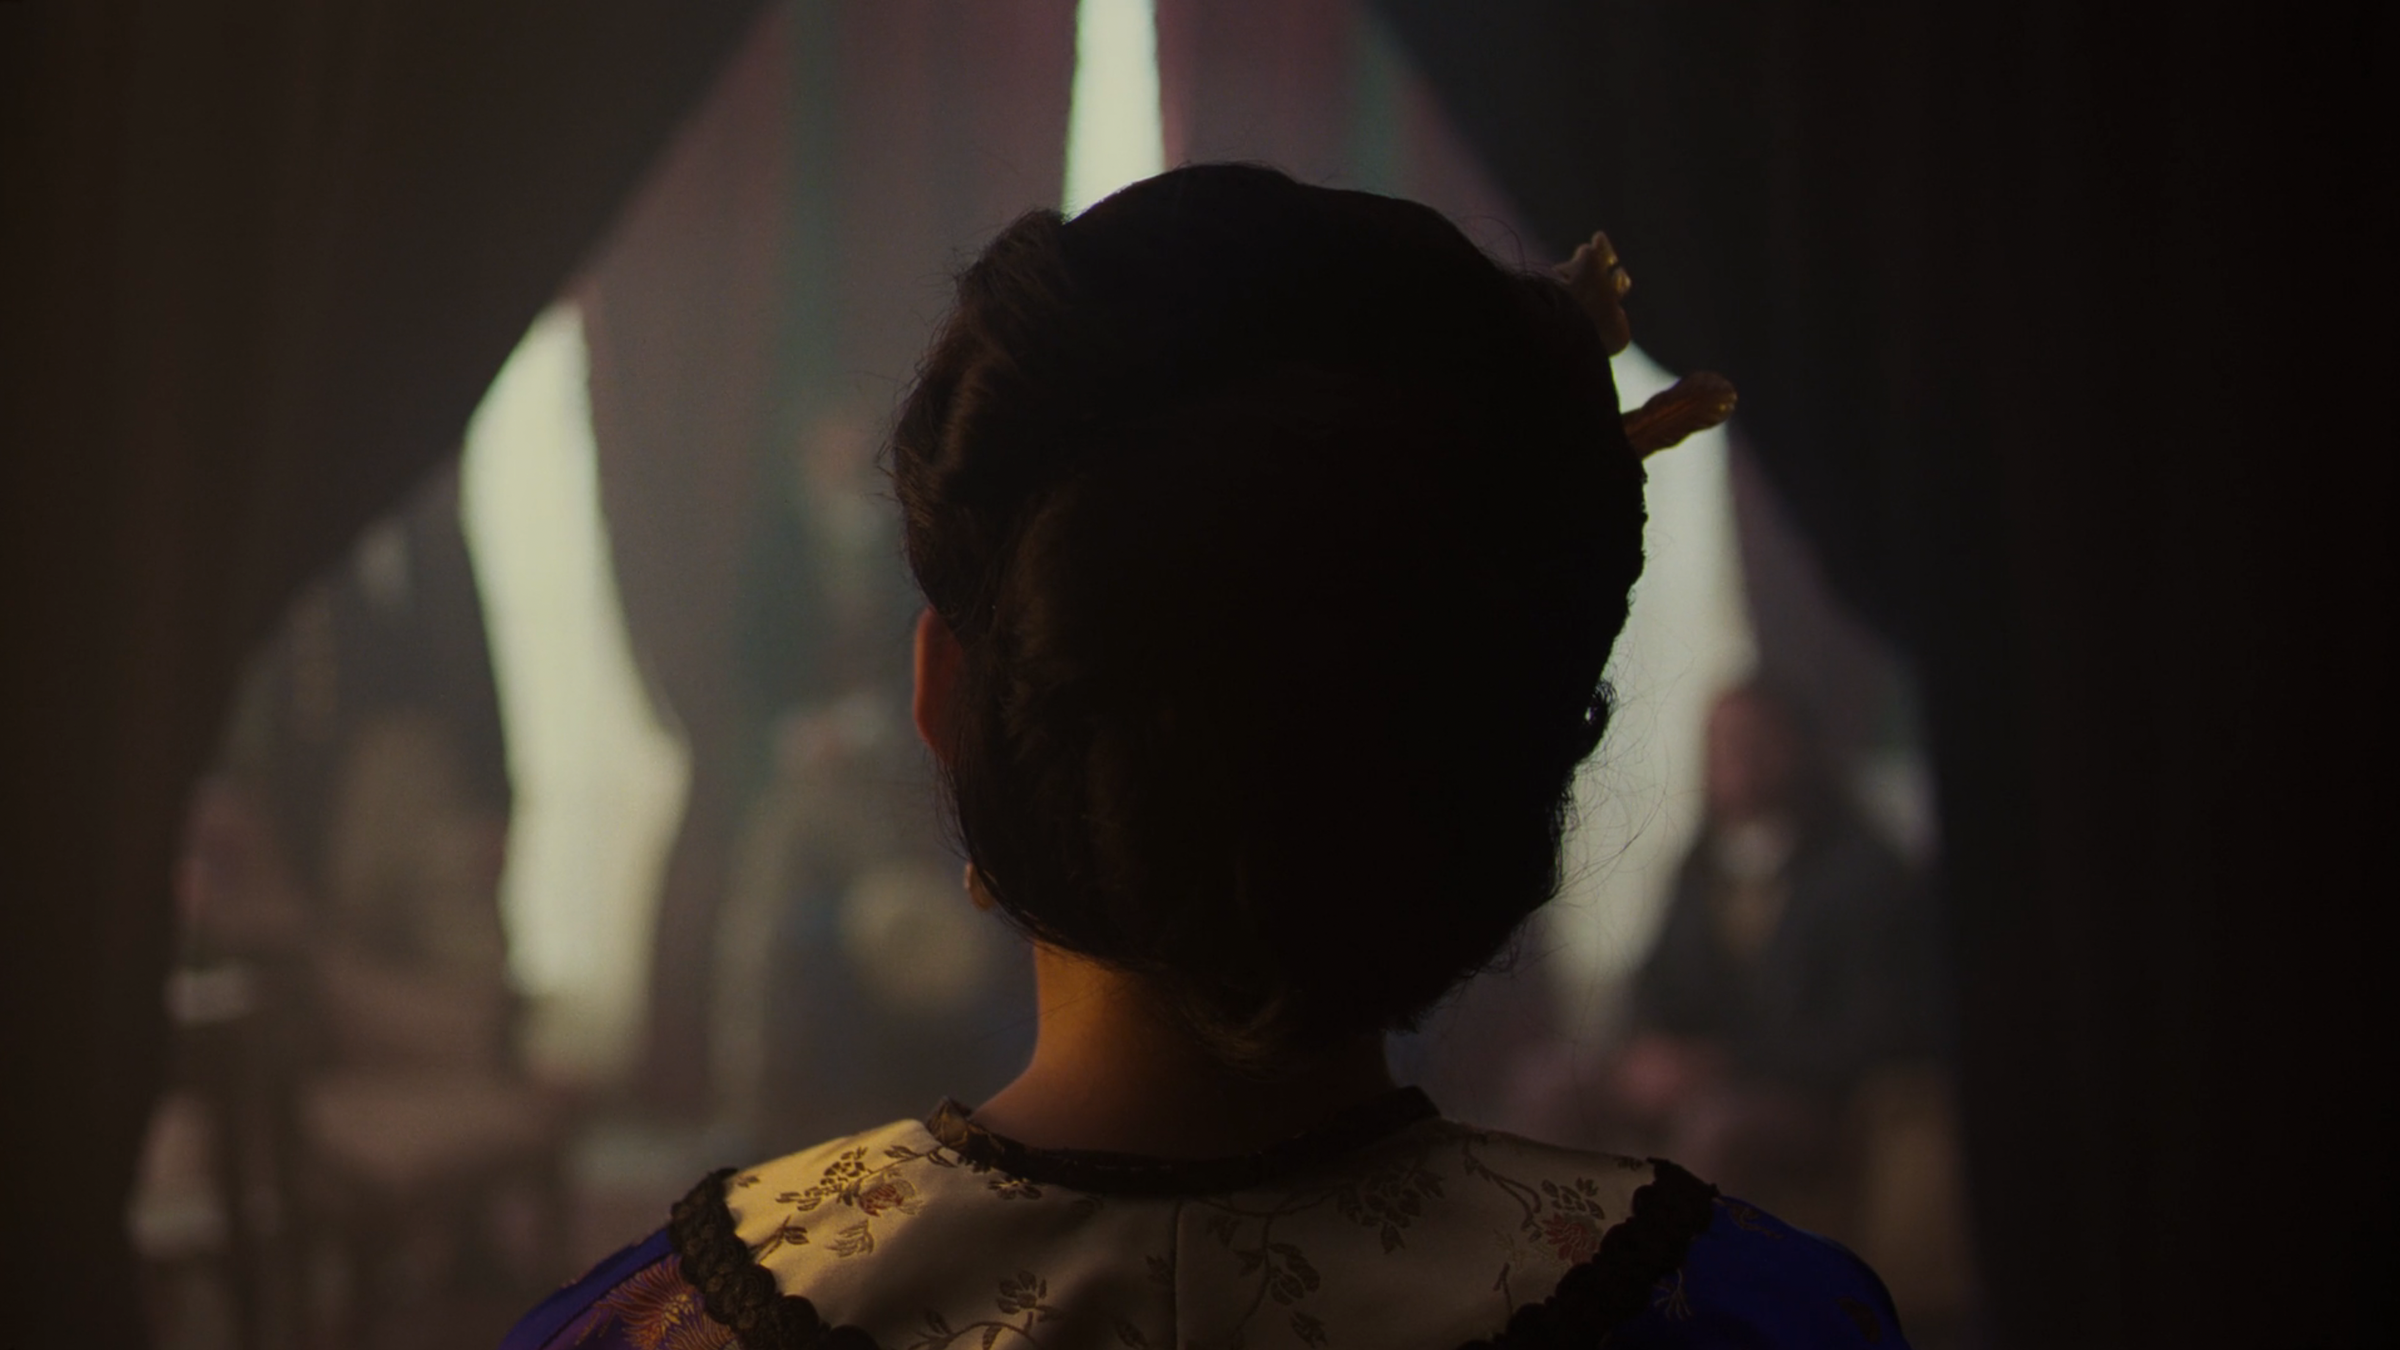 A film still from Astonishing Little Feet, a short film about Afong Moy by Maegan Hoaung. We see the back of the actress playing Moy's head, facing forward, a curtain in front of her drawn to reveal her blurred audience of four men.